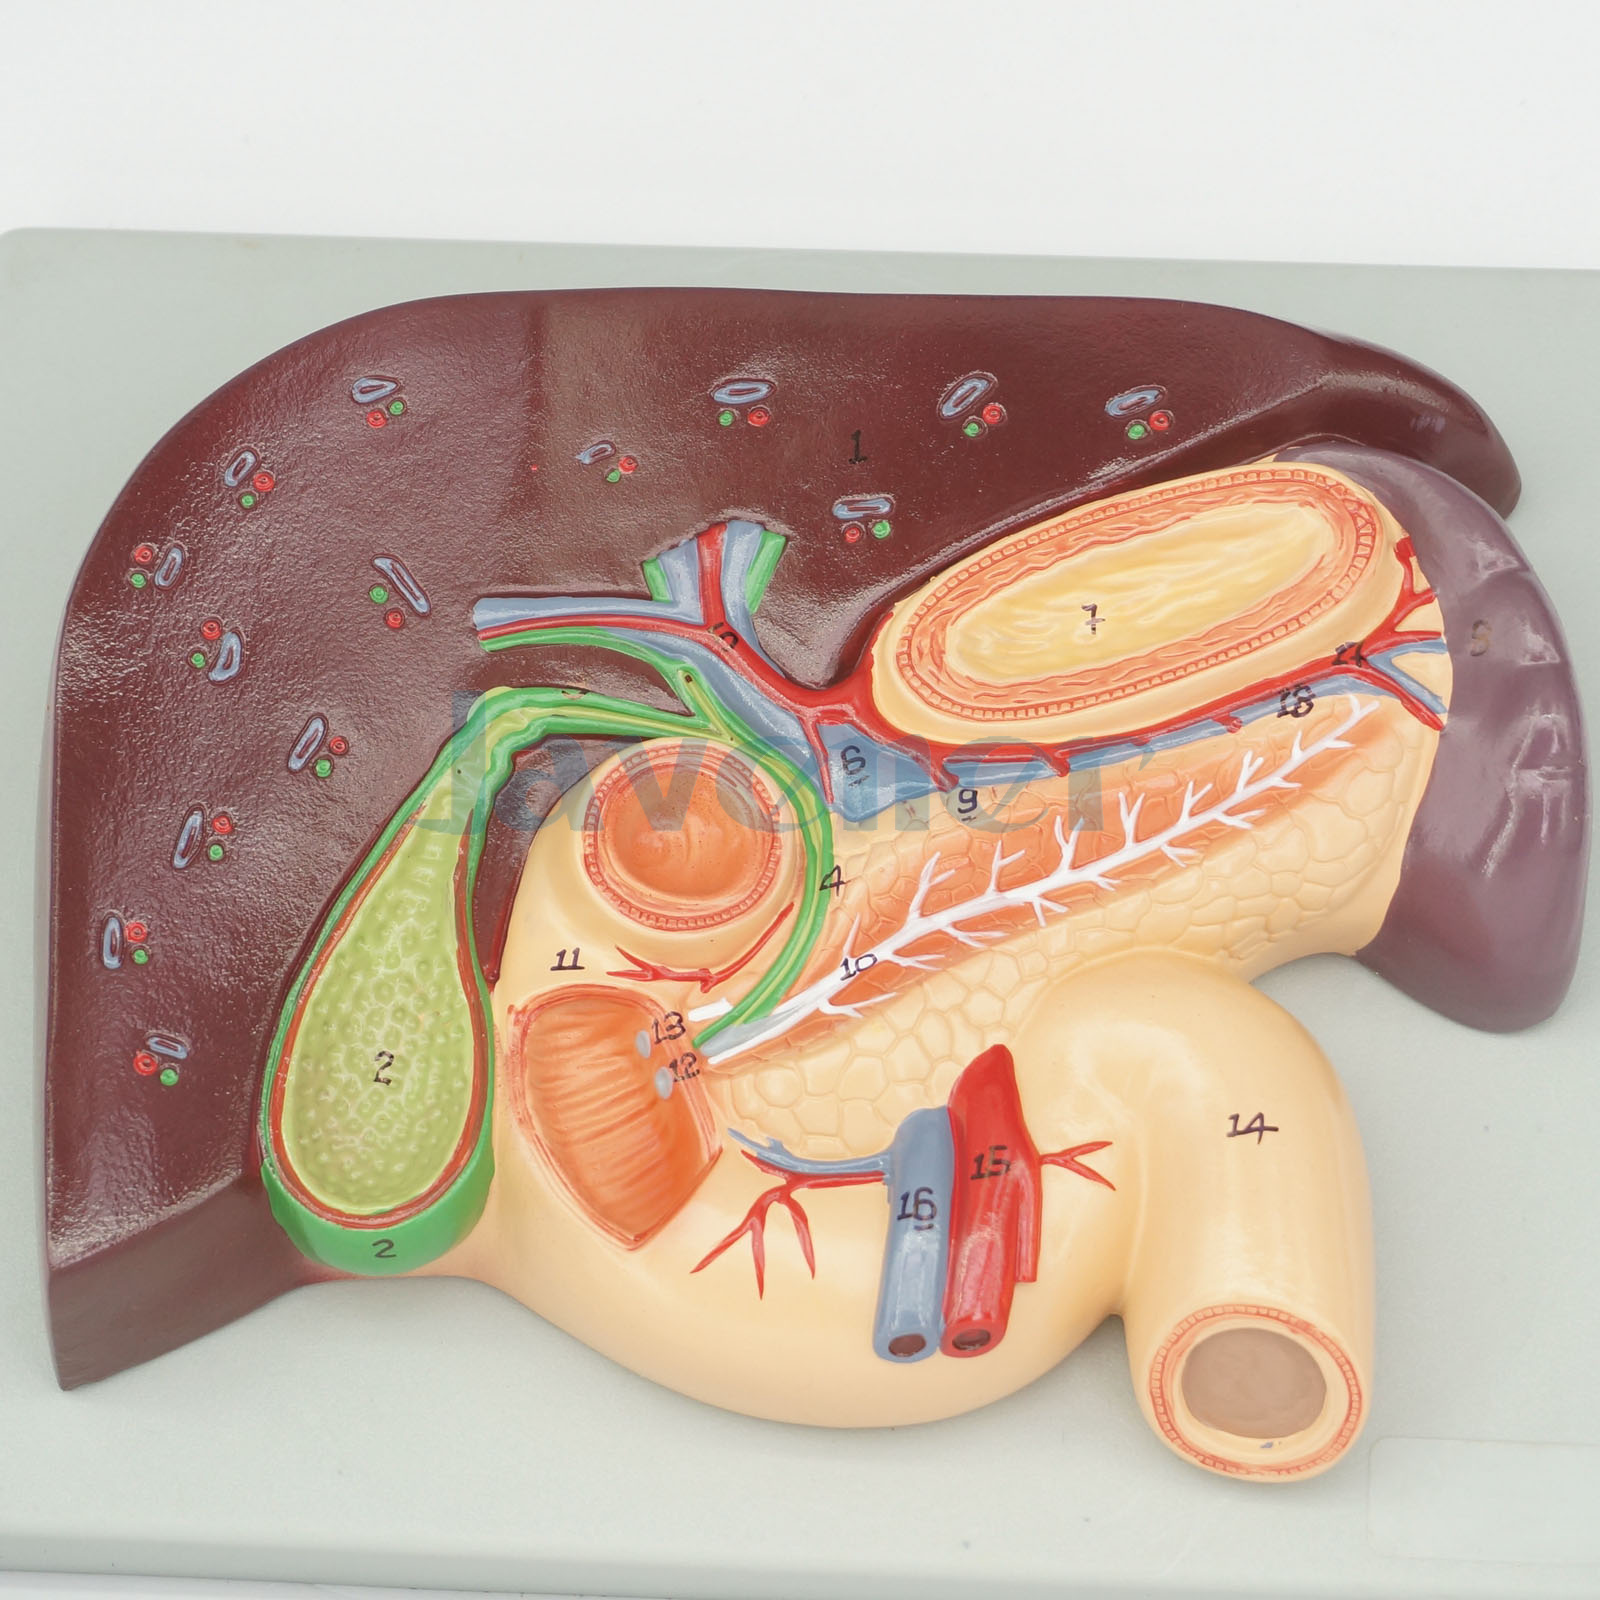 Cameo Type Human Liver and Duodenum Anatomy Model Medical Visceral